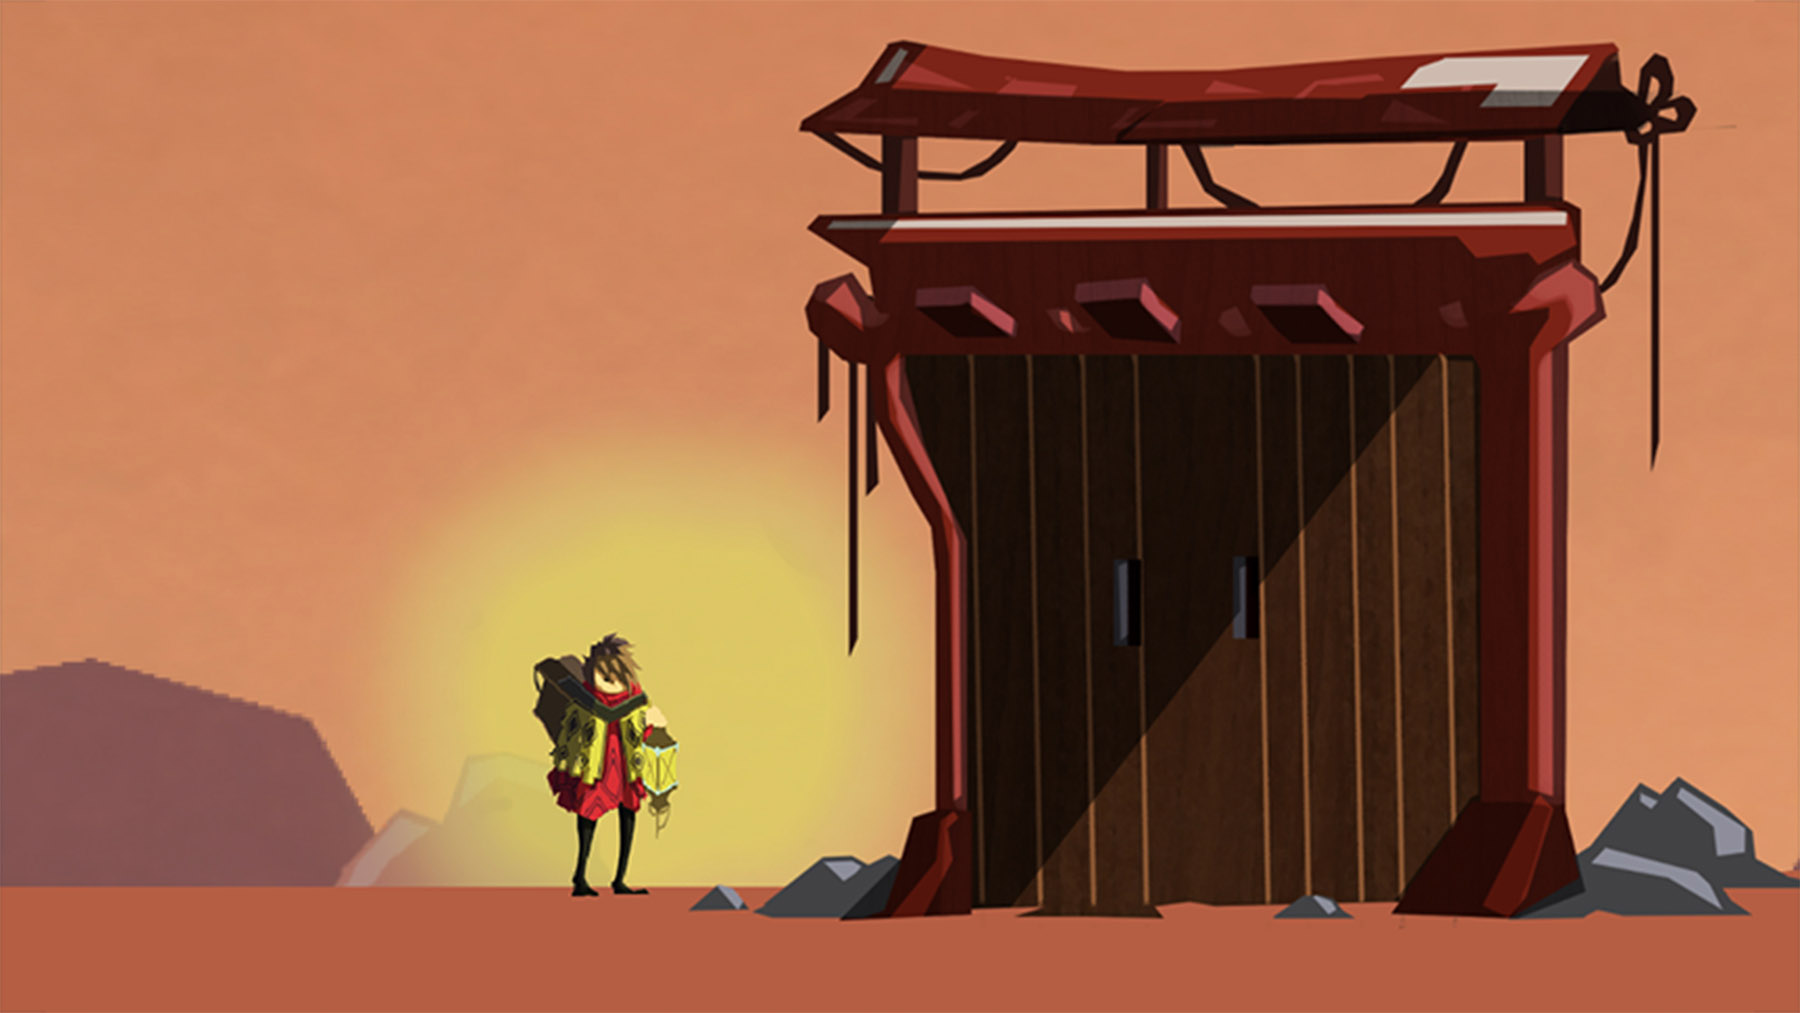 View full size version of a gameplay screenshot of traveler character outside a large gate